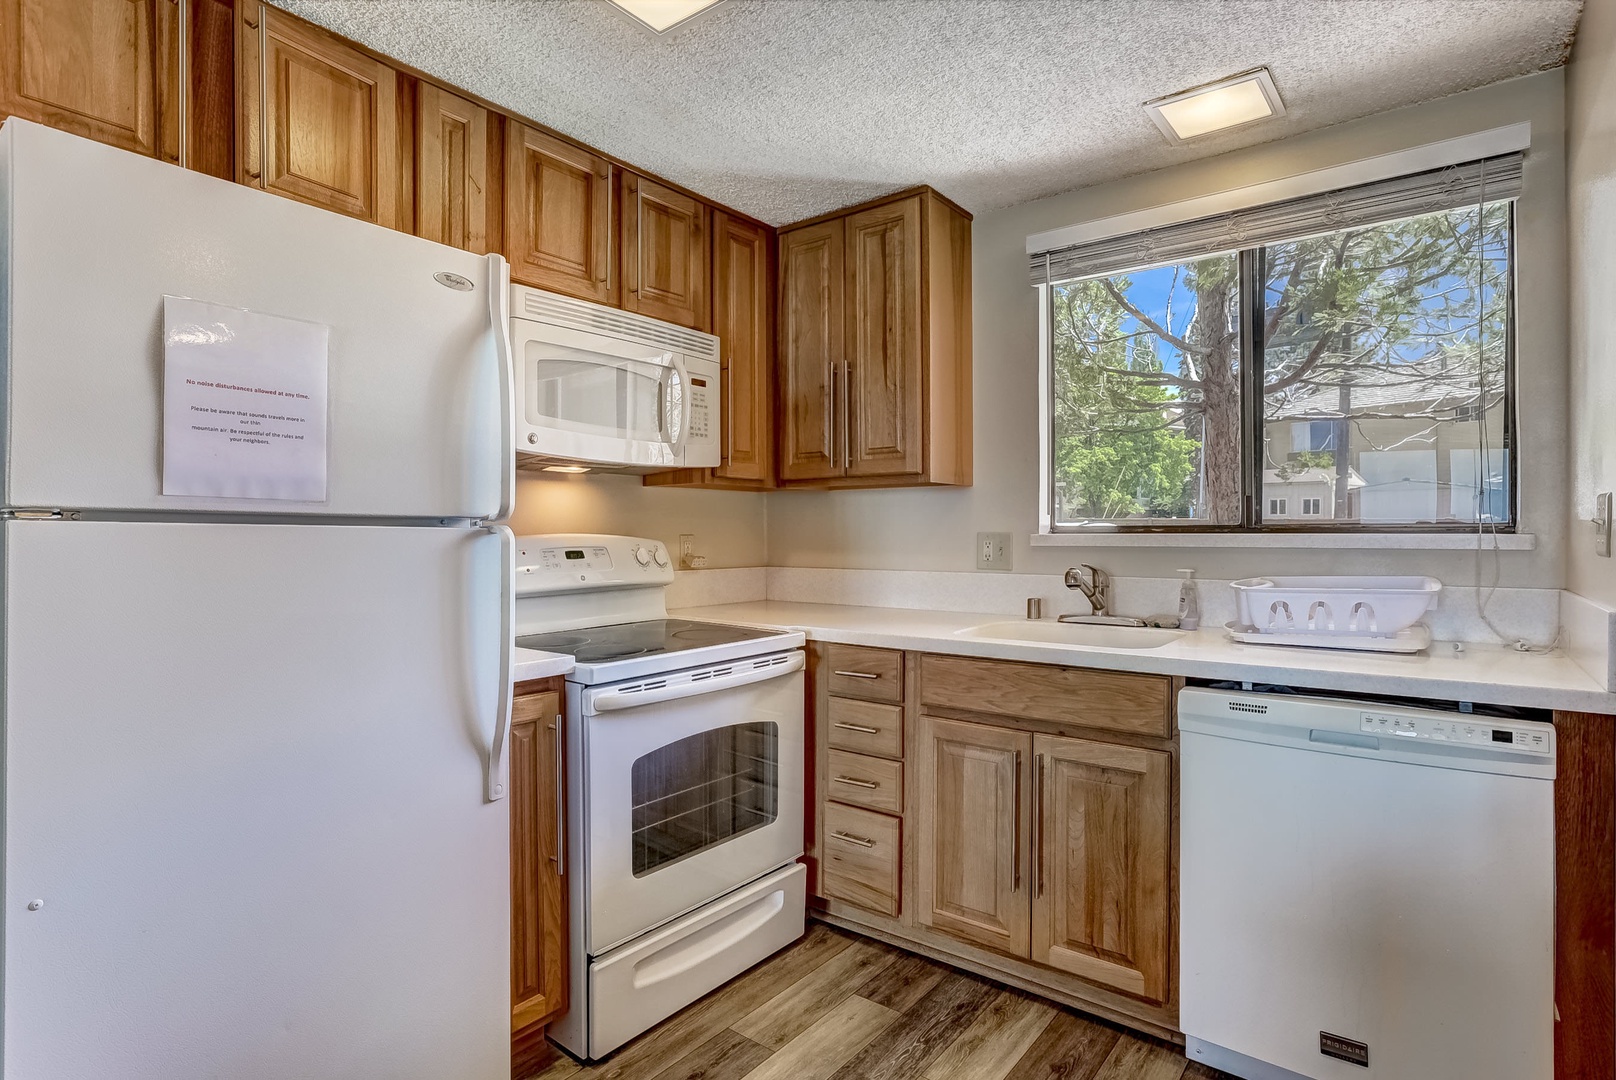 Full kitchen with electric stovetop, dishwasher, toaster and more